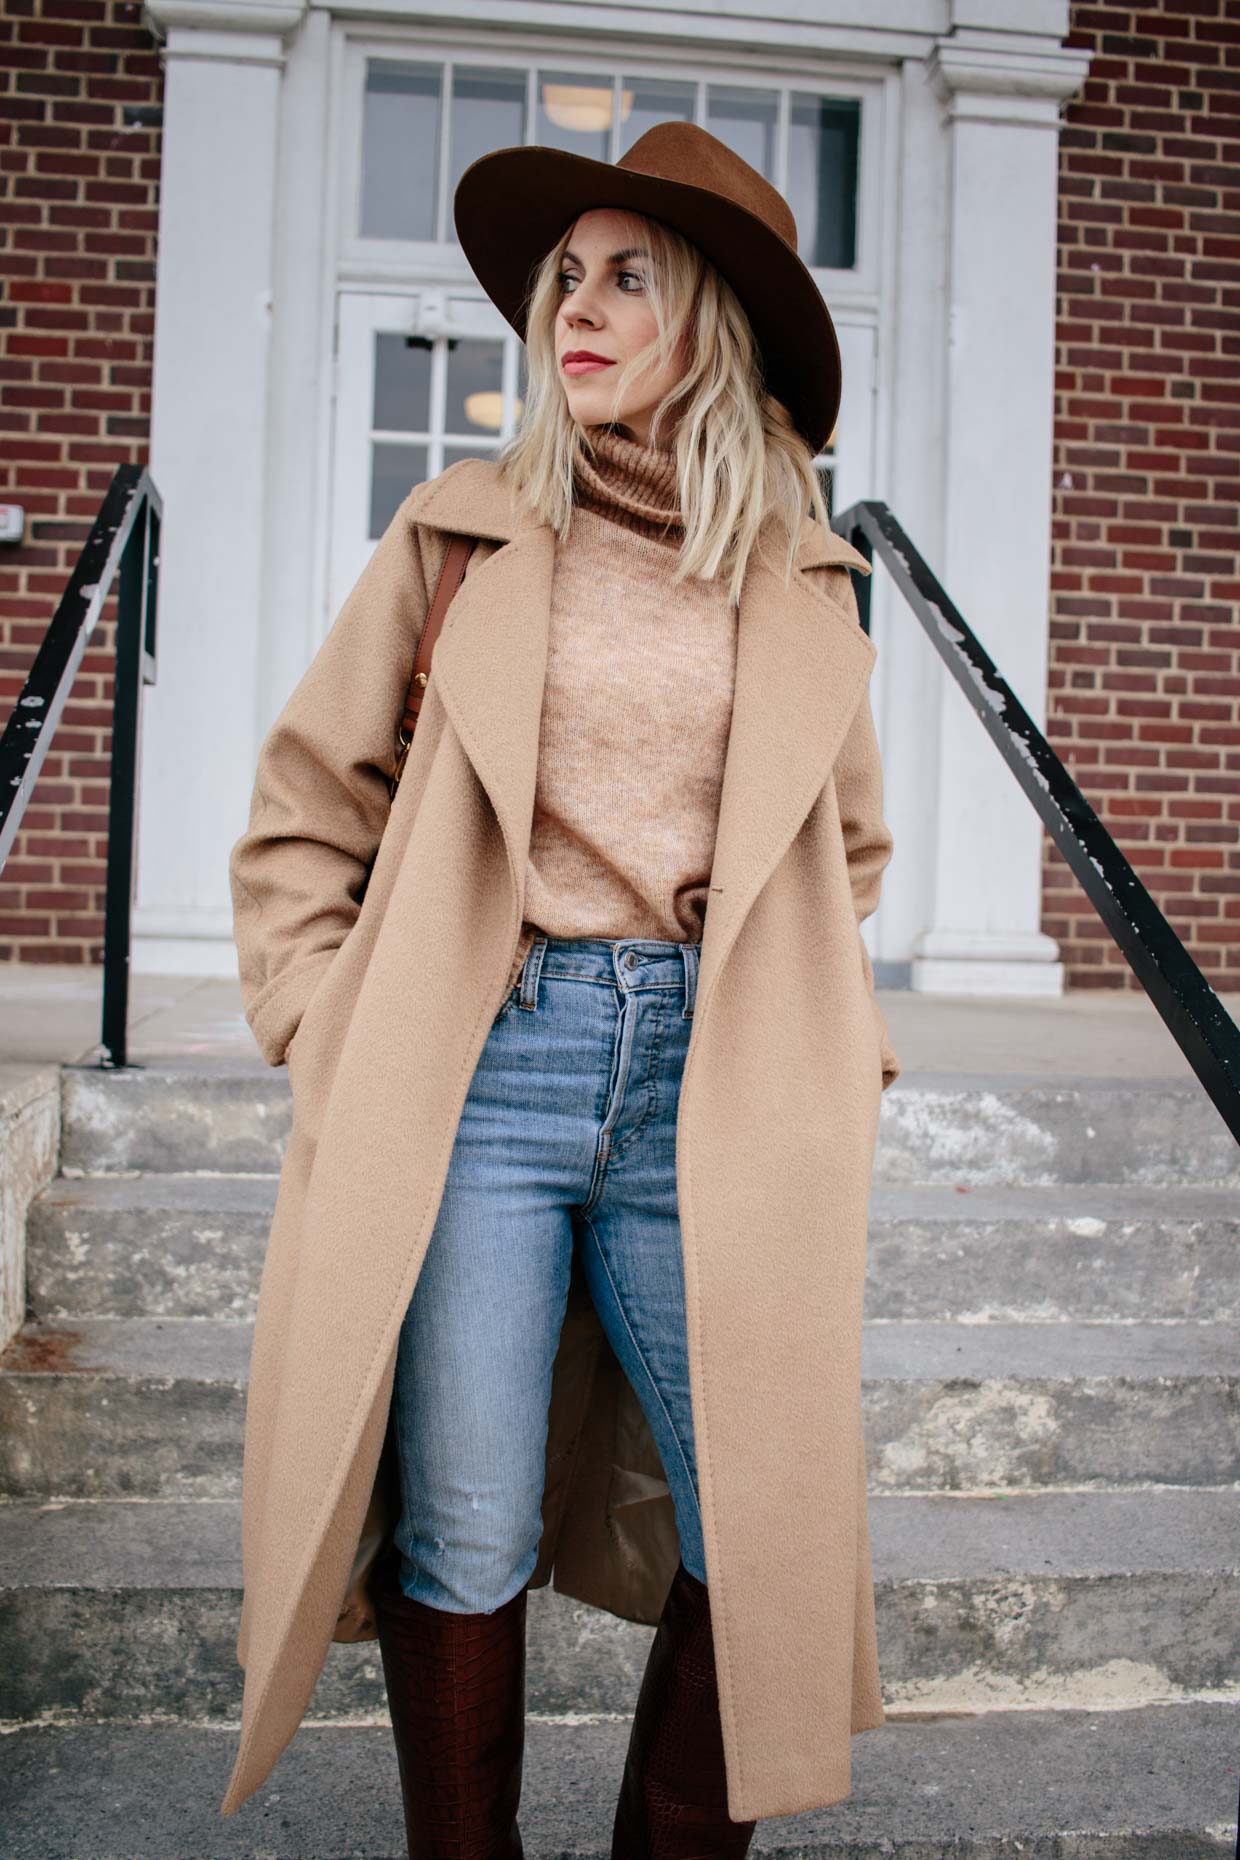 Chic Street Look: Camel Coat and Fedora Hat – Fashion Trends and Street  Style - People & Styles